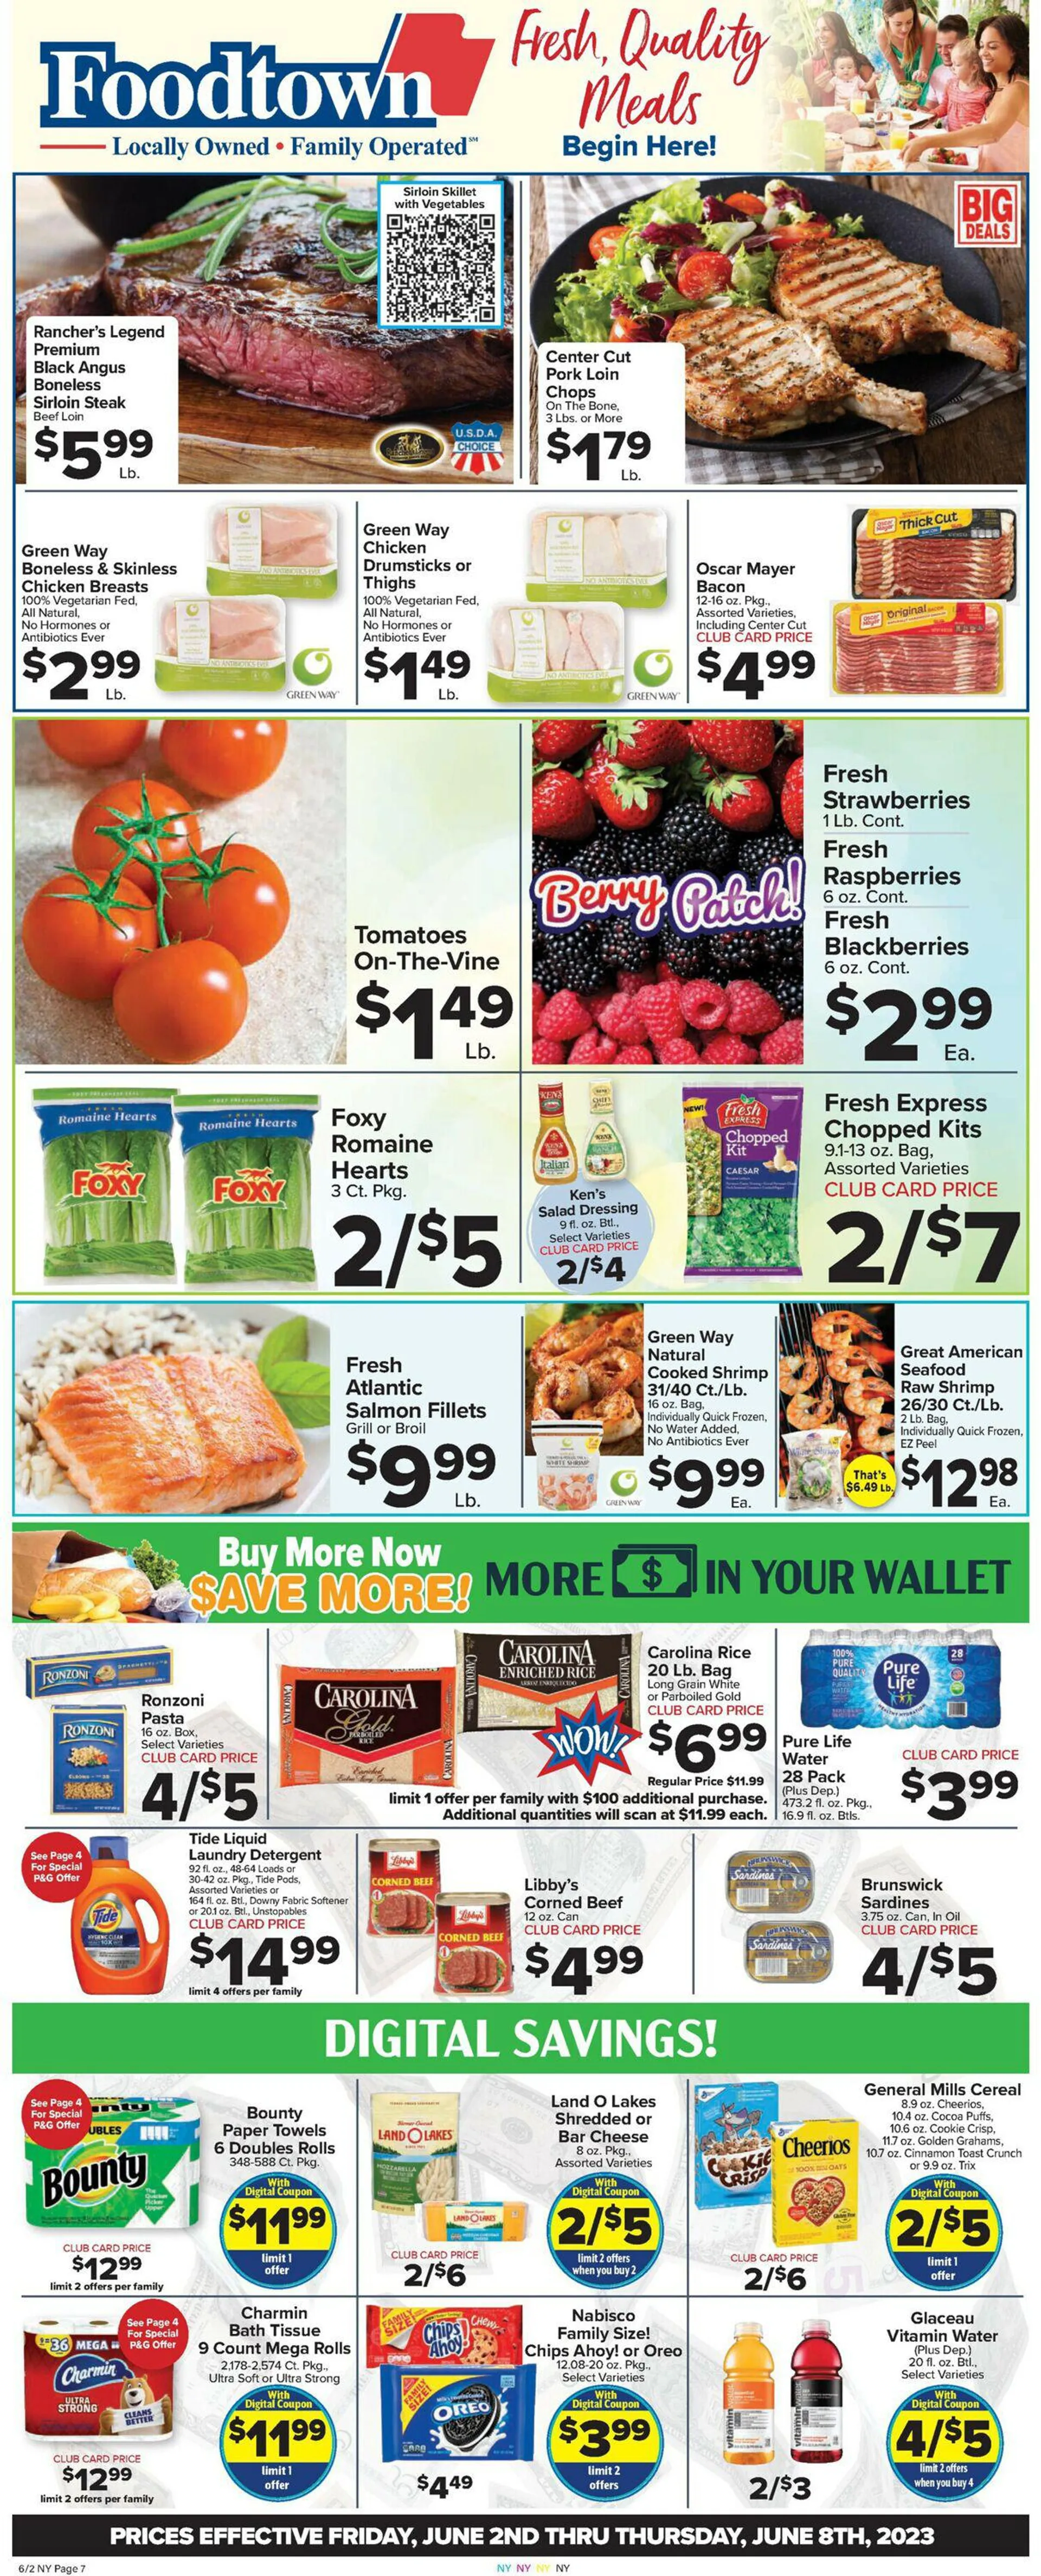 Foodtown Current weekly ad - 1